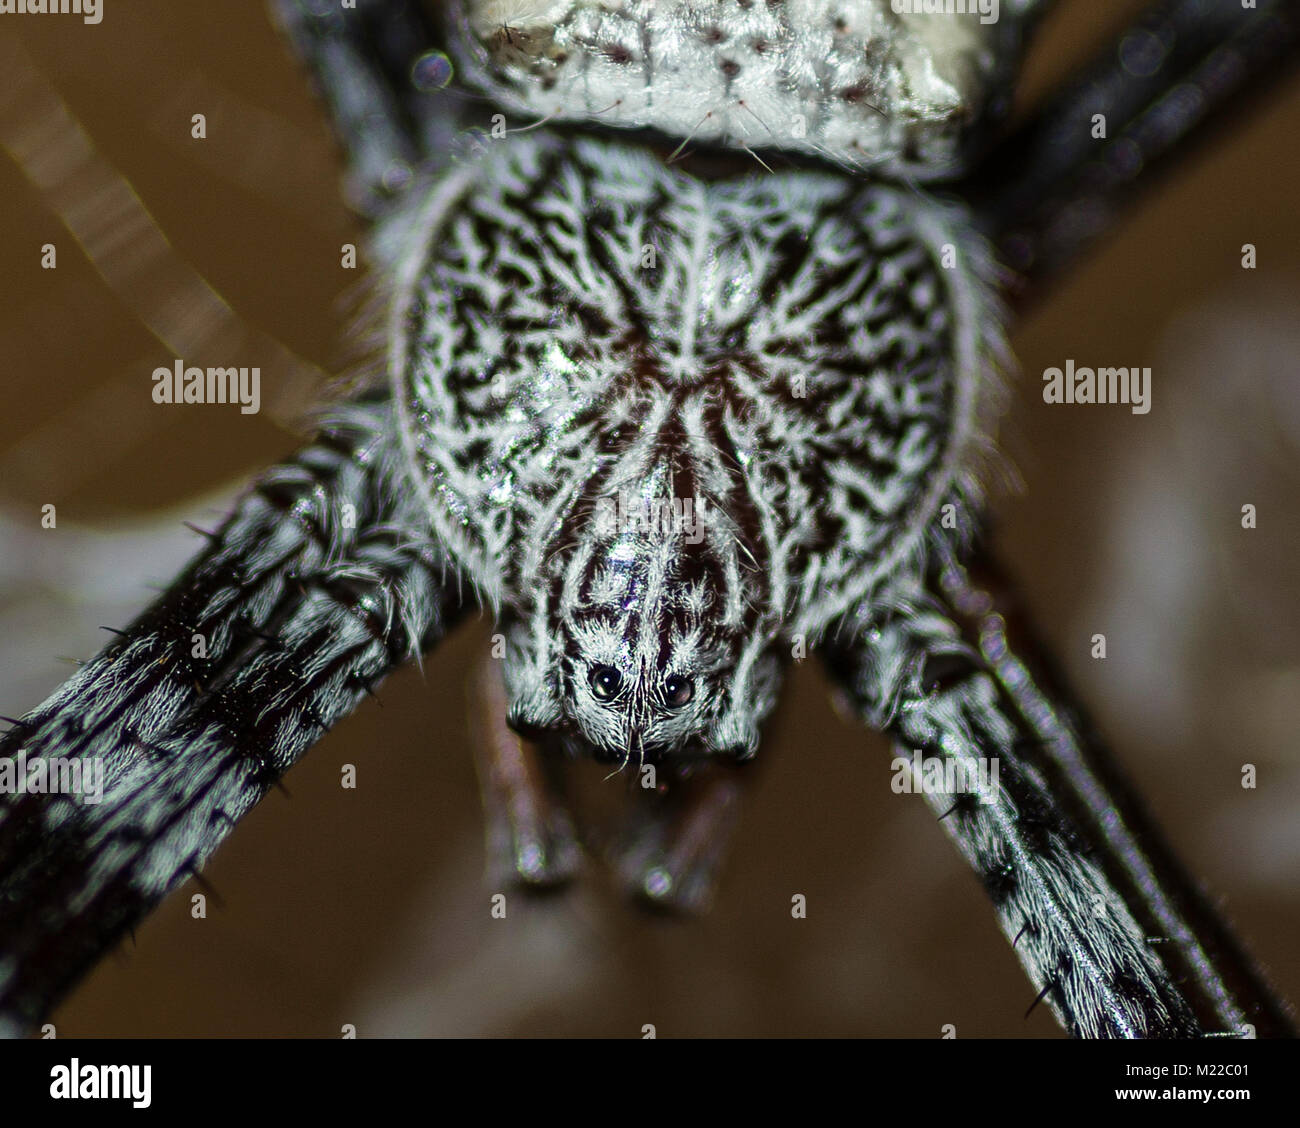 Close-up of an orb-weaver spider Stock Photo